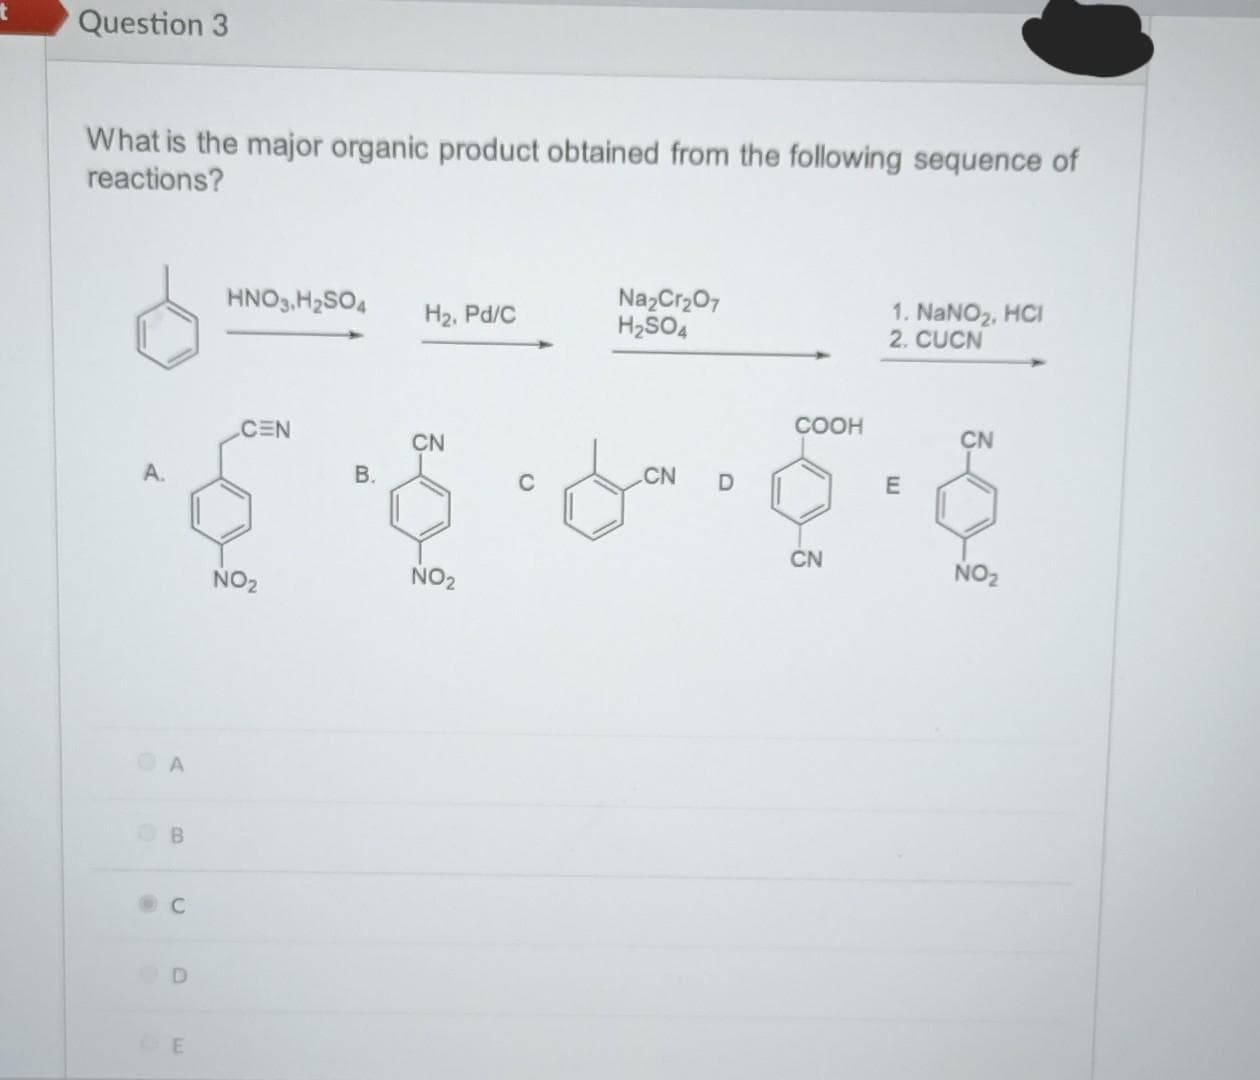 t
Question 3
What is the major organic product obtained from the following sequence of
reactions?
A.
A
OB
Ⓡ
C
D
CE
HNO3, H₂SO4
CEN
NO₂
B.
H₂, Pd/C
CN
NO₂
Na₂Cr₂O7
H₂SO4
CN D
COOH
CN
1. NaNO₂, HCl
2. CUCN
E
CN
NO₂